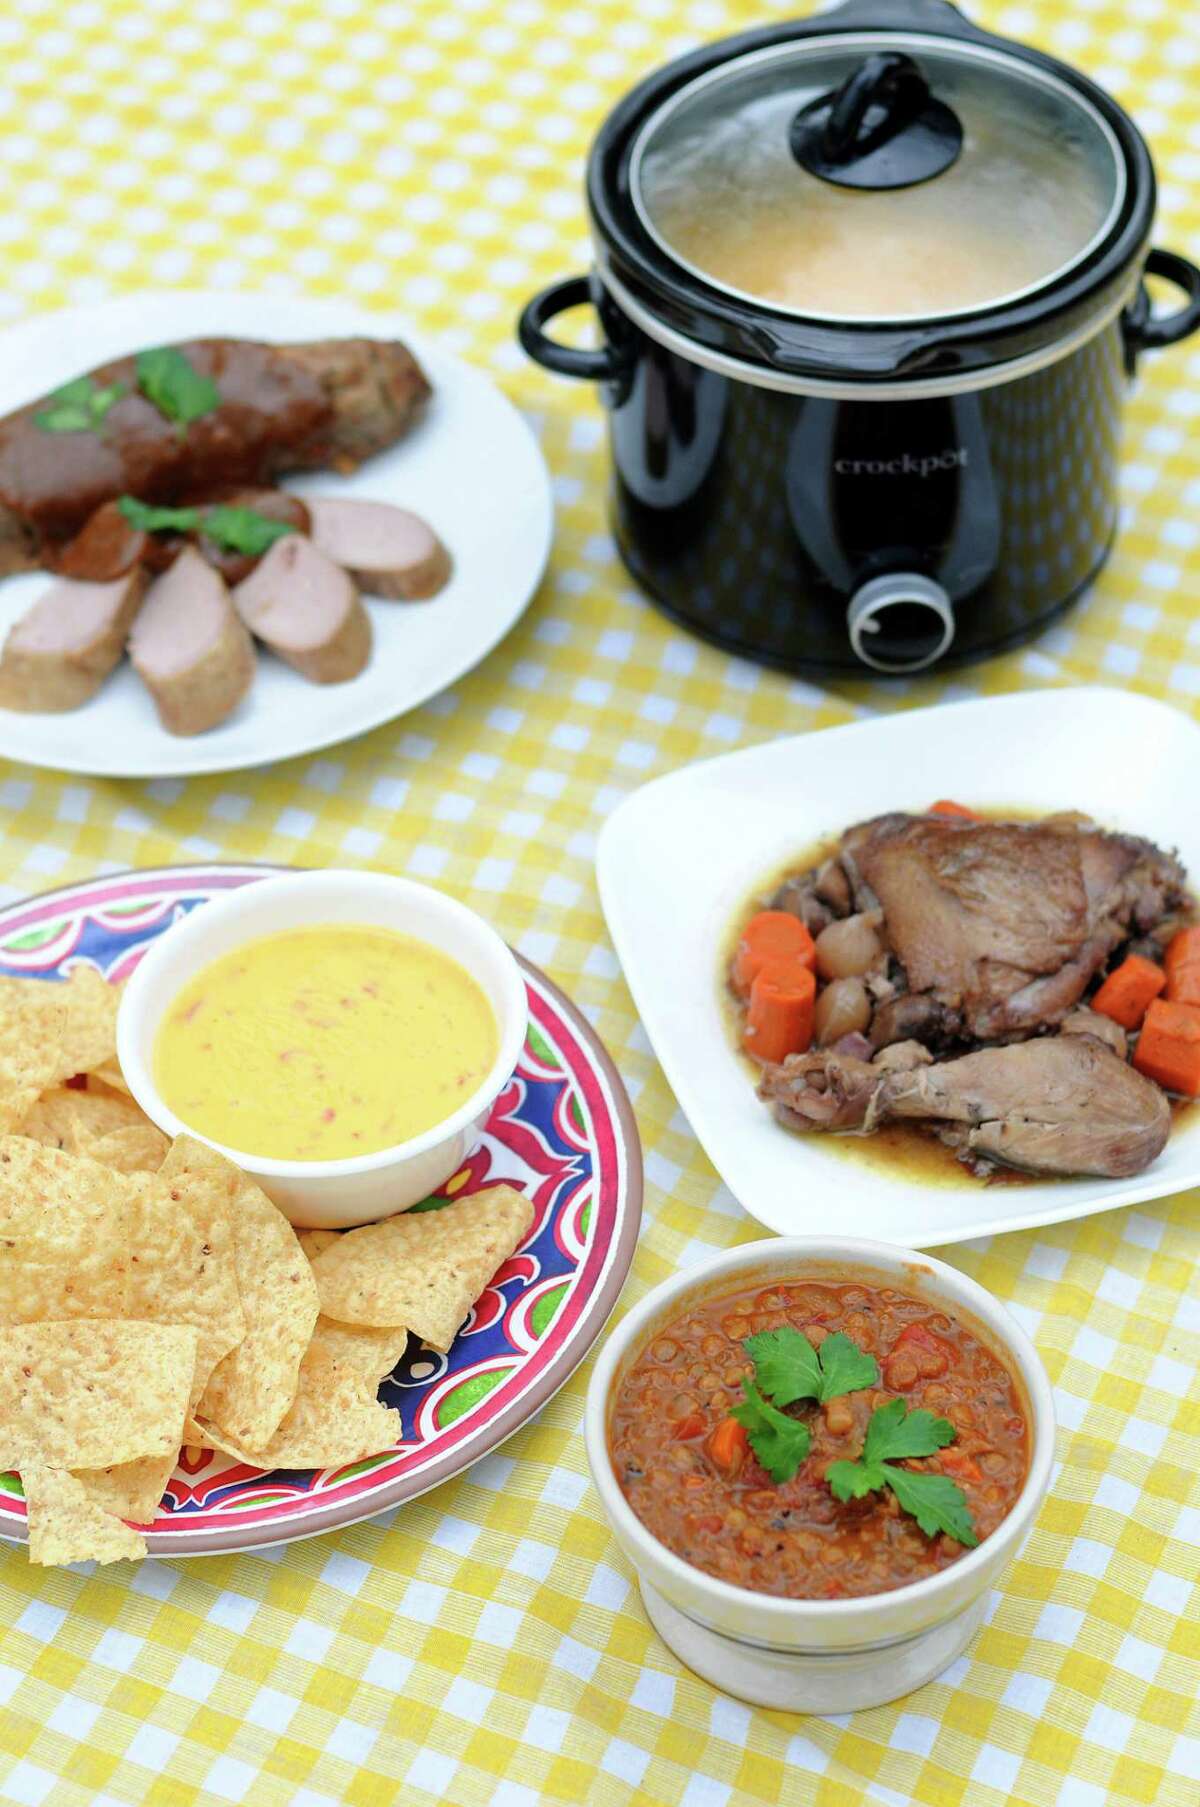 A selection of dishes made in a slow cooker including (clockwise from top left) Slow Cooker Honey Mustard Pork Tenderloin, Slow Cooker Coq Au Vin, Vegan Slow Cooker Lentil Soup and Classic Slow Cooker Queso